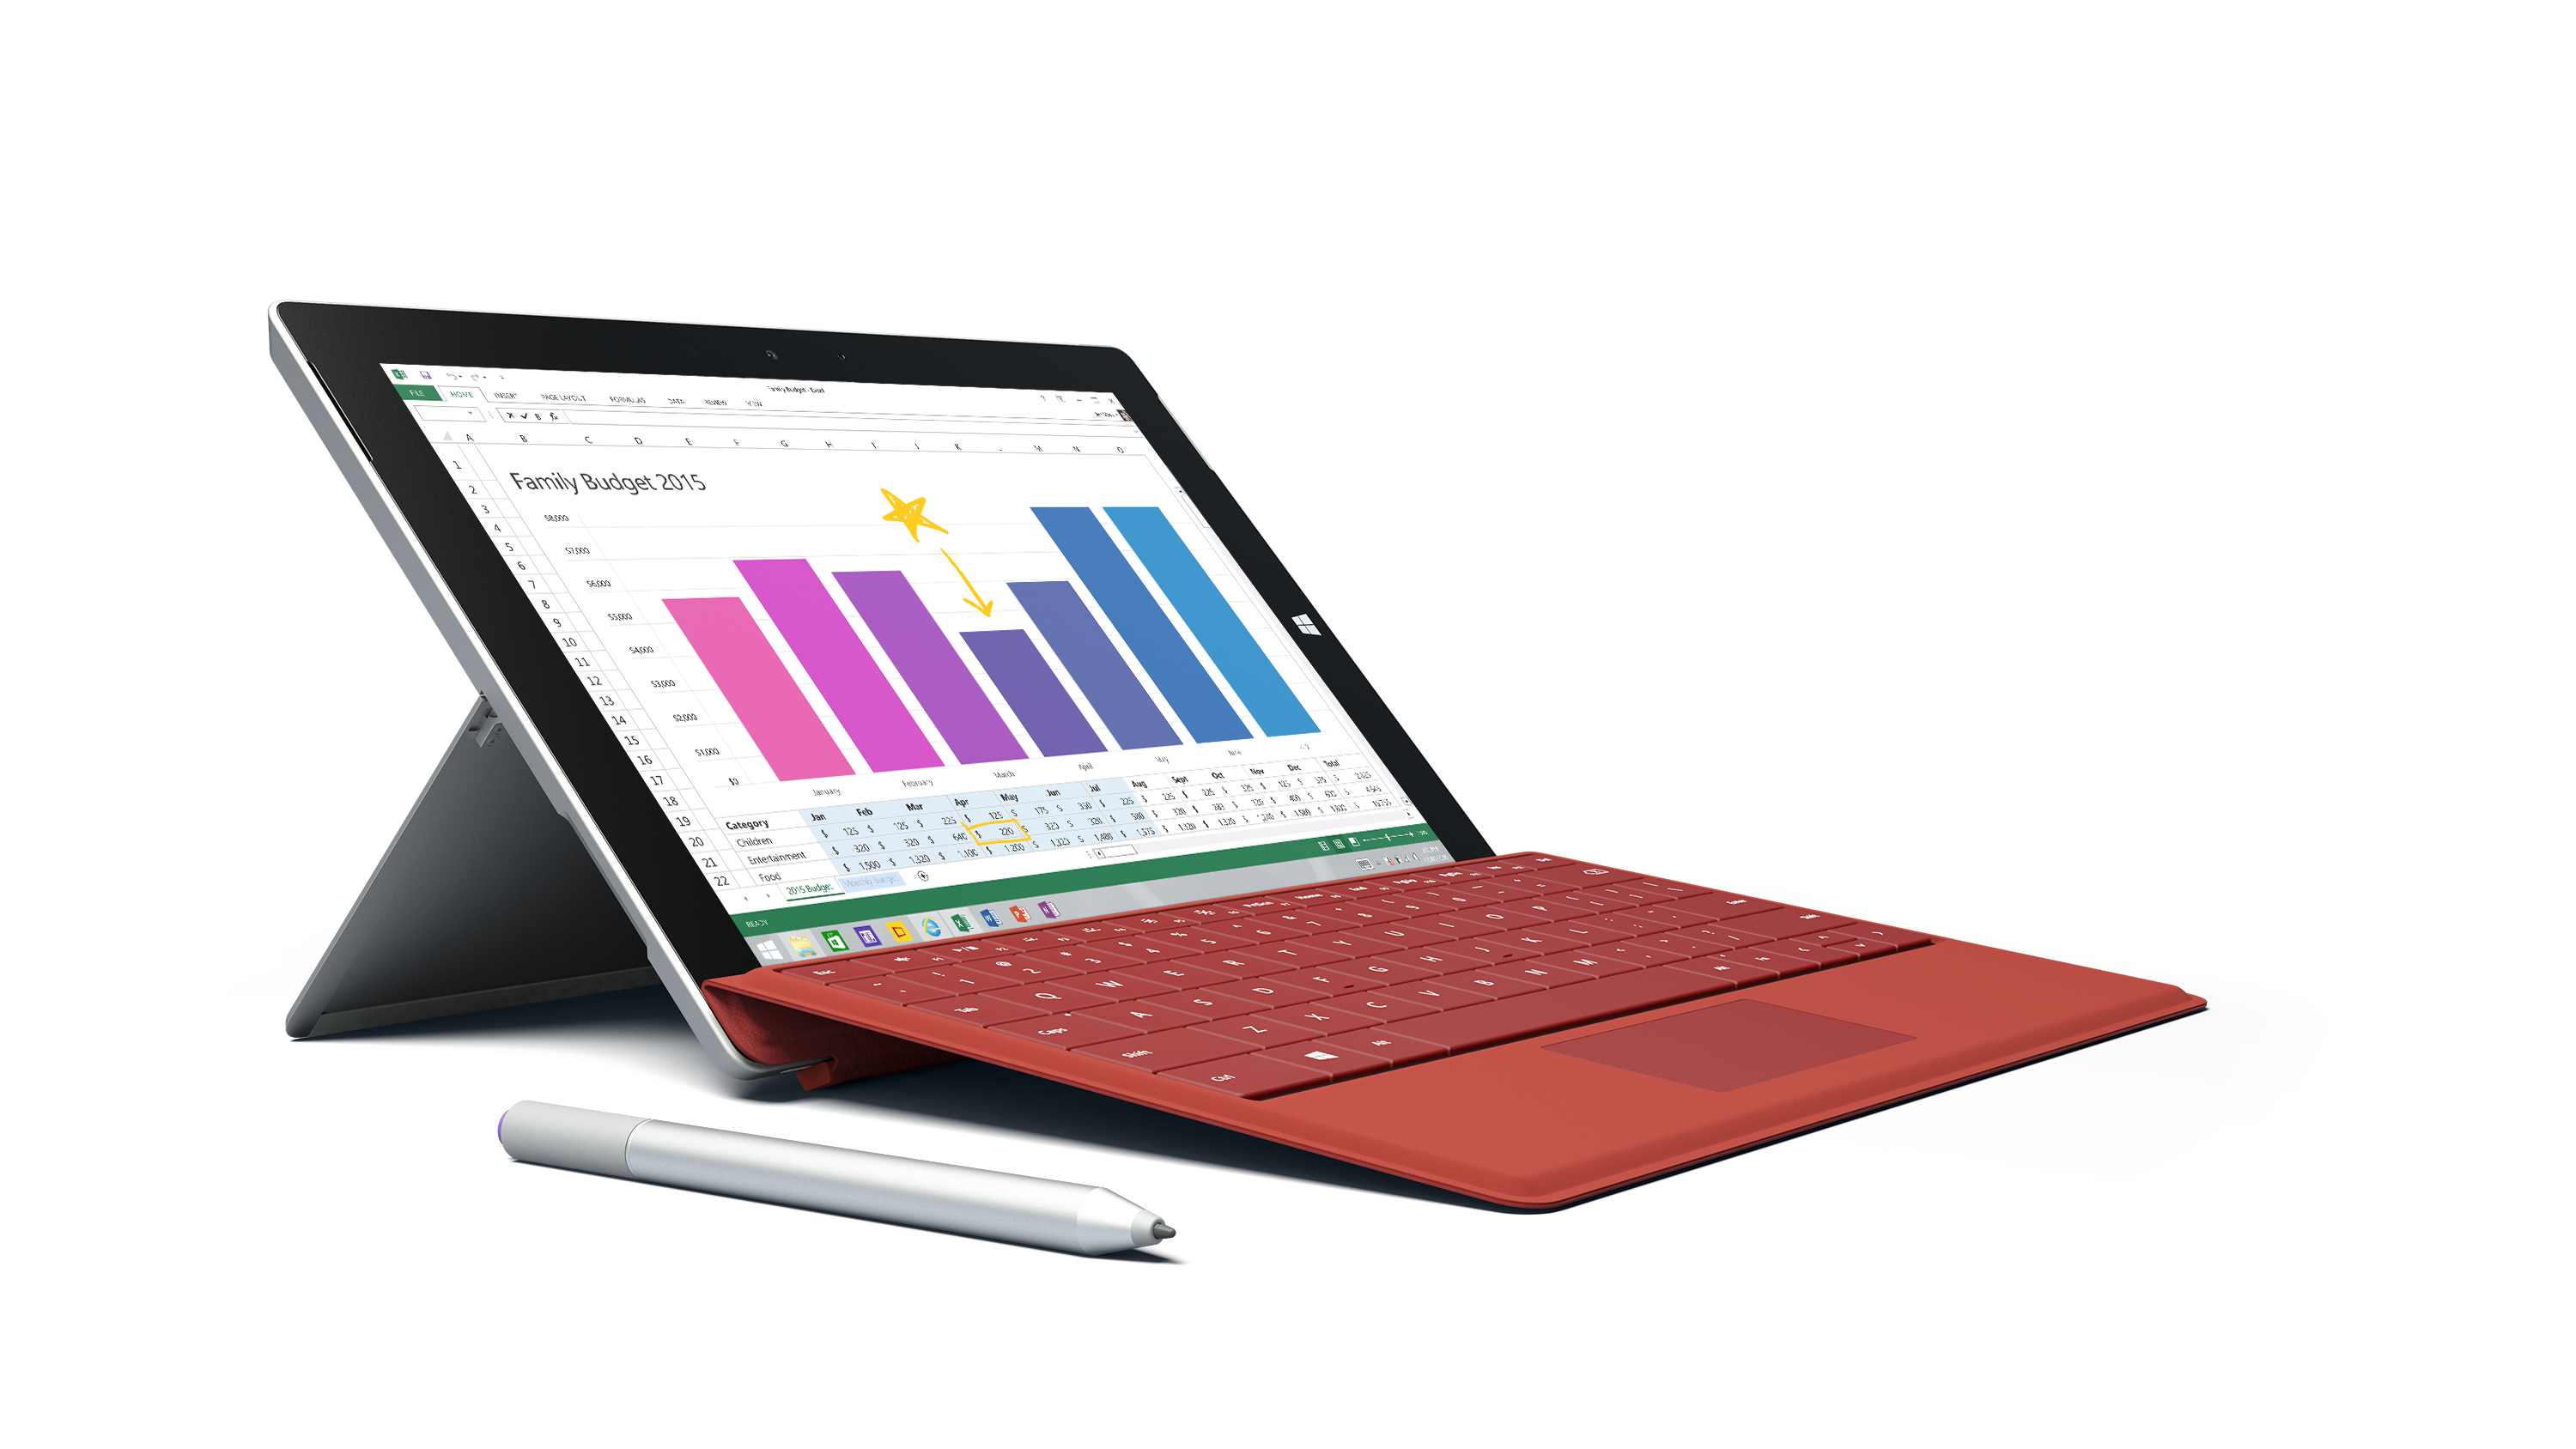 Microsoft Surface 3 to be discontinued at the end of this year